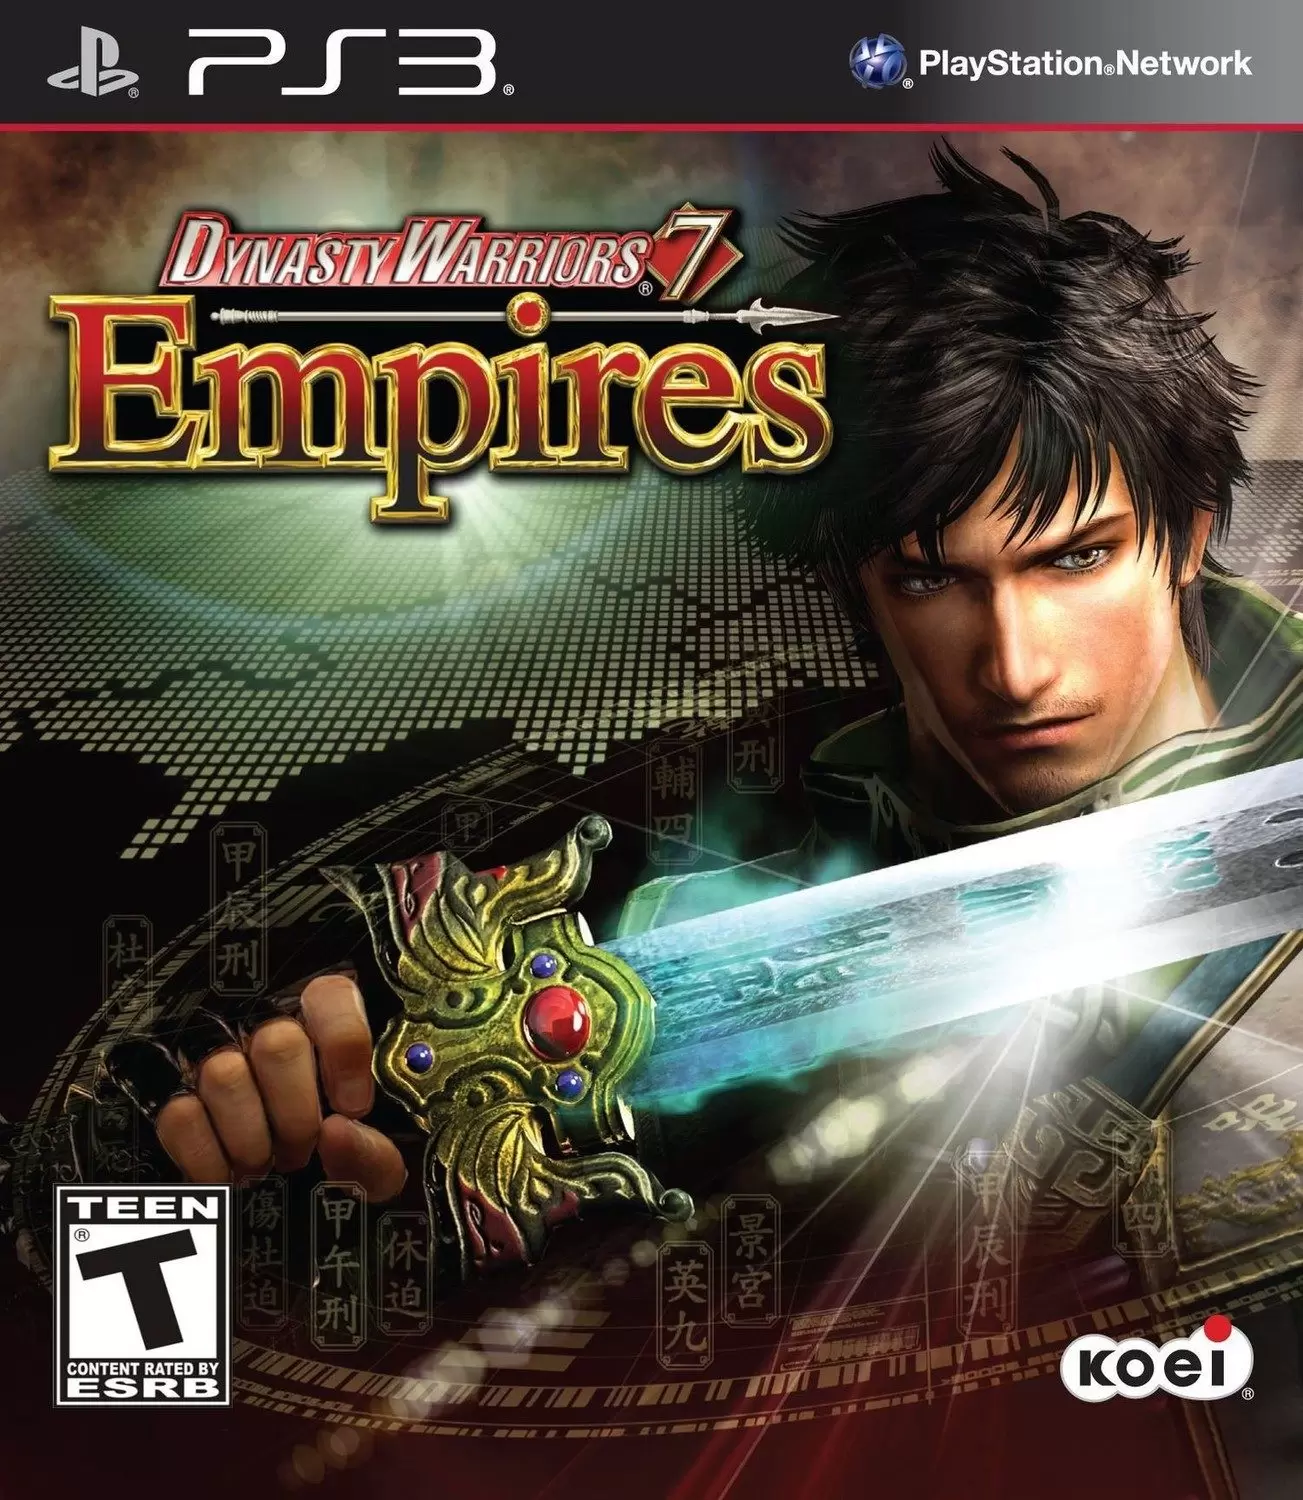 PS3 Games - Dynasty Warriors 7: Empires